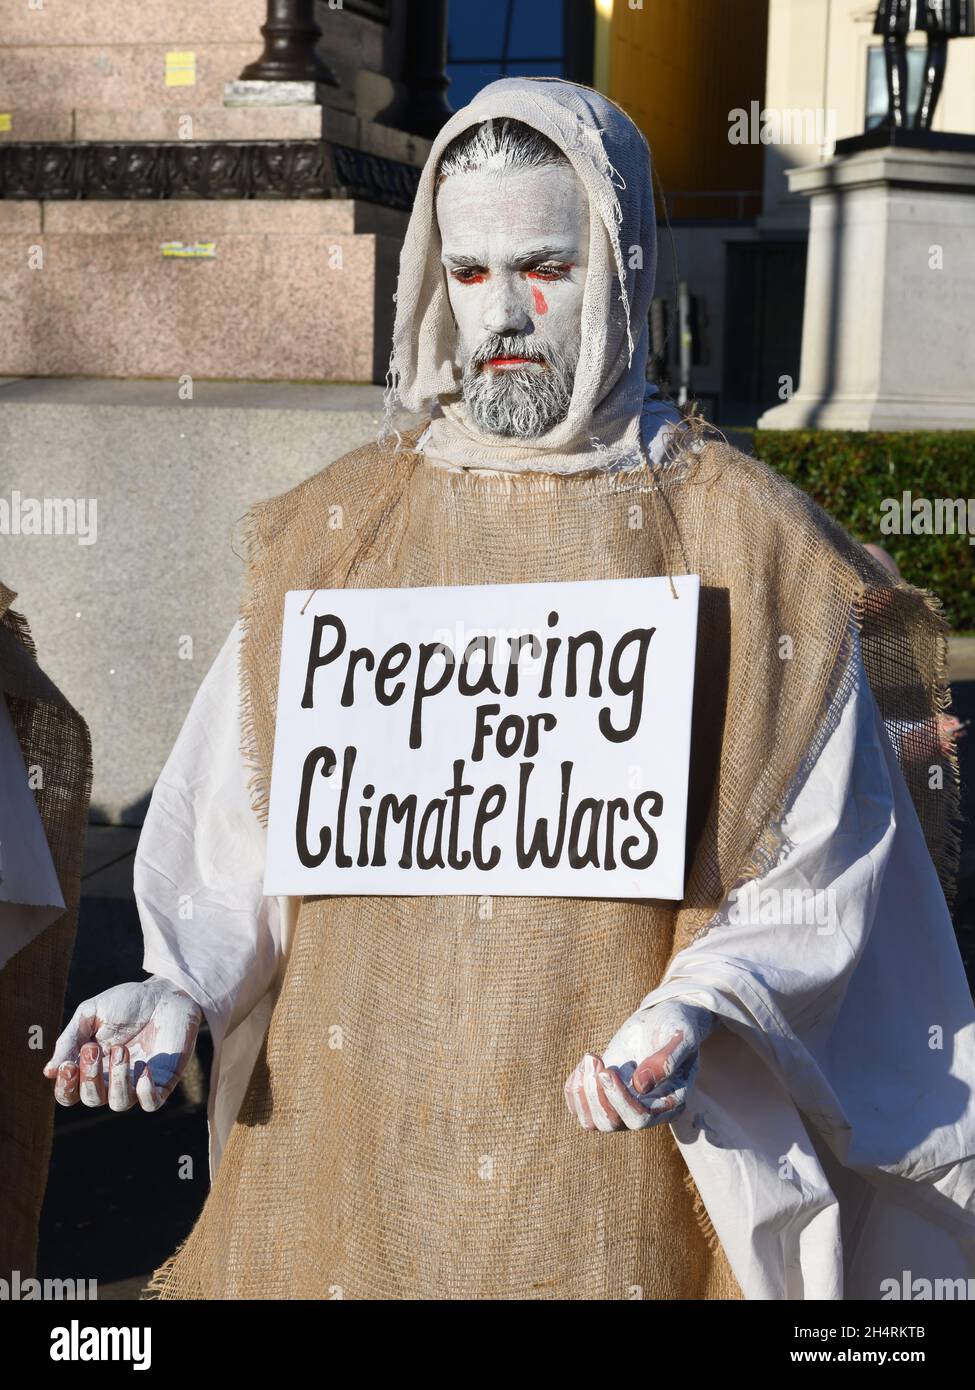 Glasgow, UK. 4th Nov, 2021. UK. Climate change interest group making statement by dressing in doomsday costumes and carrying placards saying 'Preparing for climate wars'. Credit. Credit: Douglas Carr/Alamy Live News Stock Photo